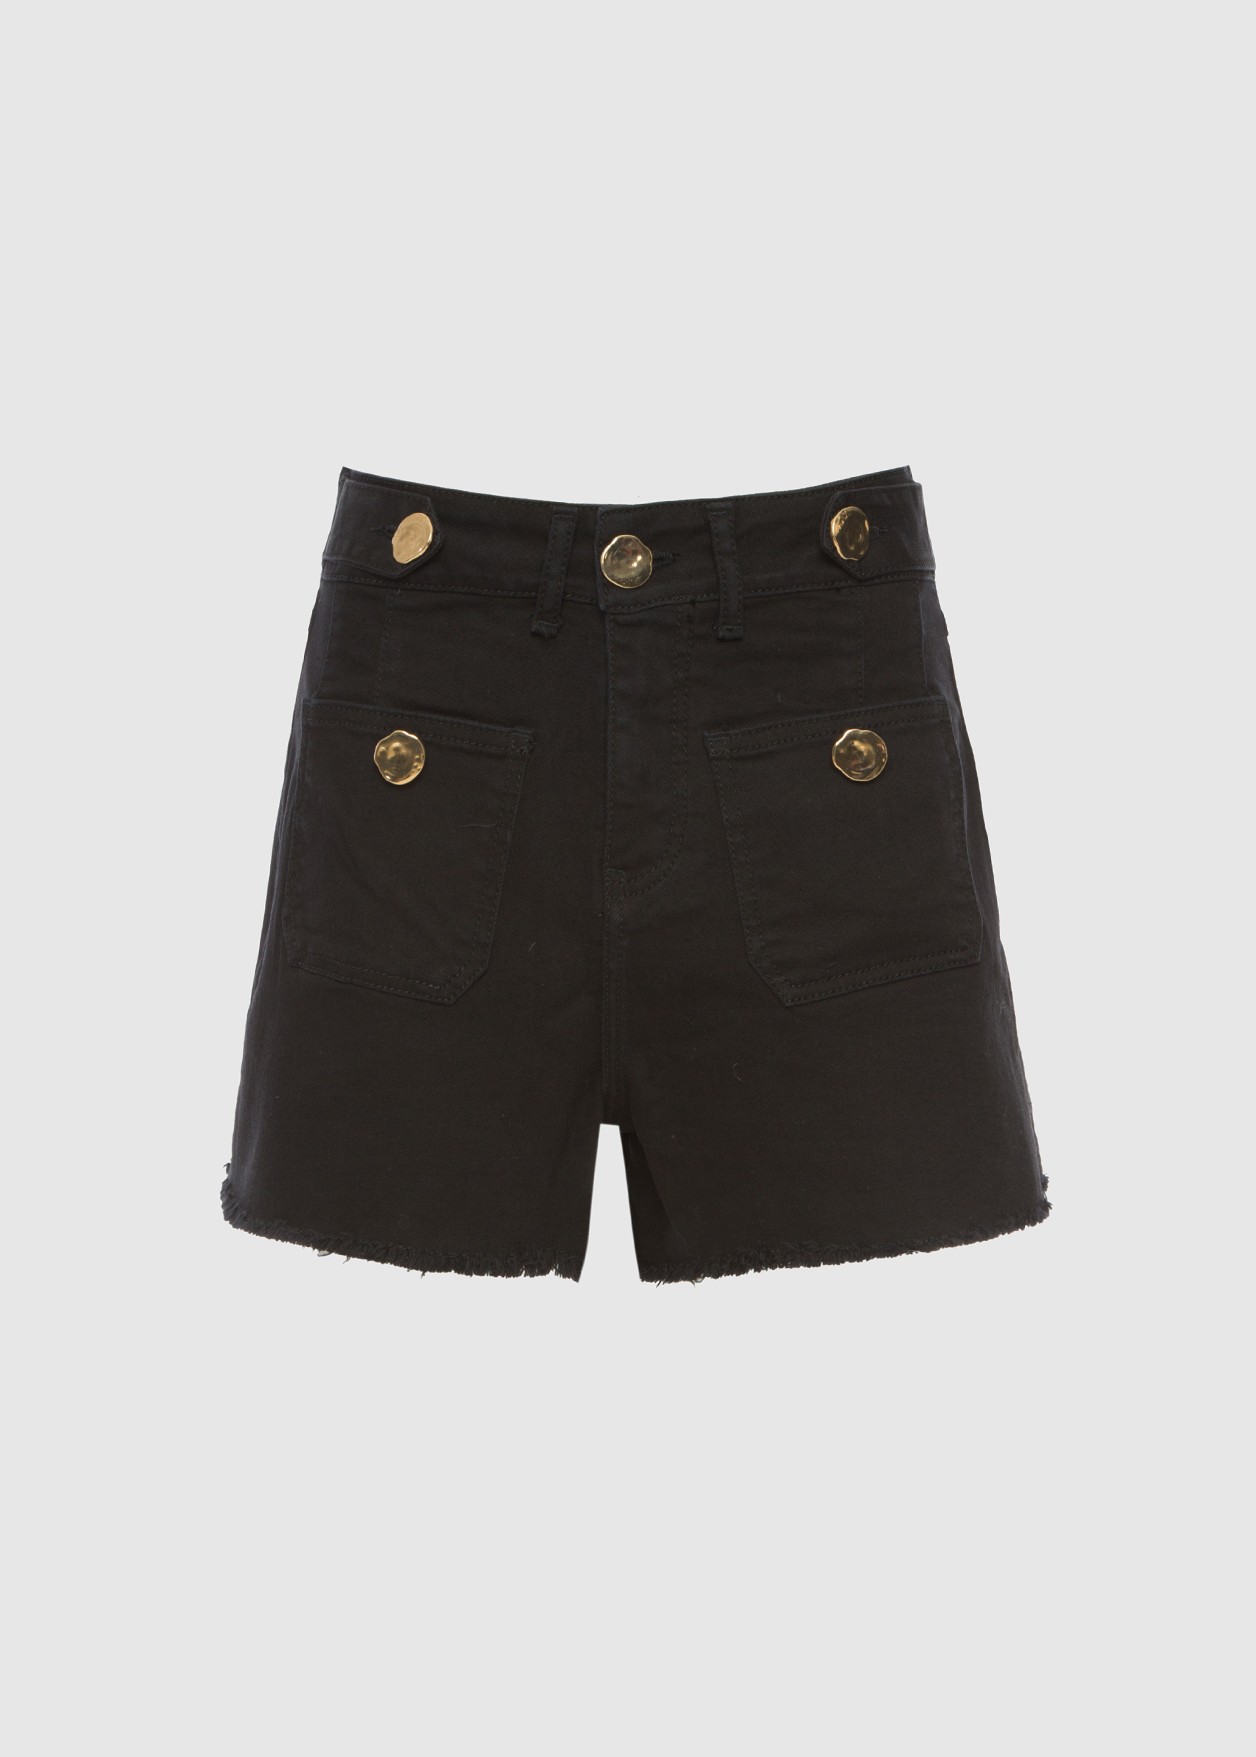 Denim shorts with gold buttons